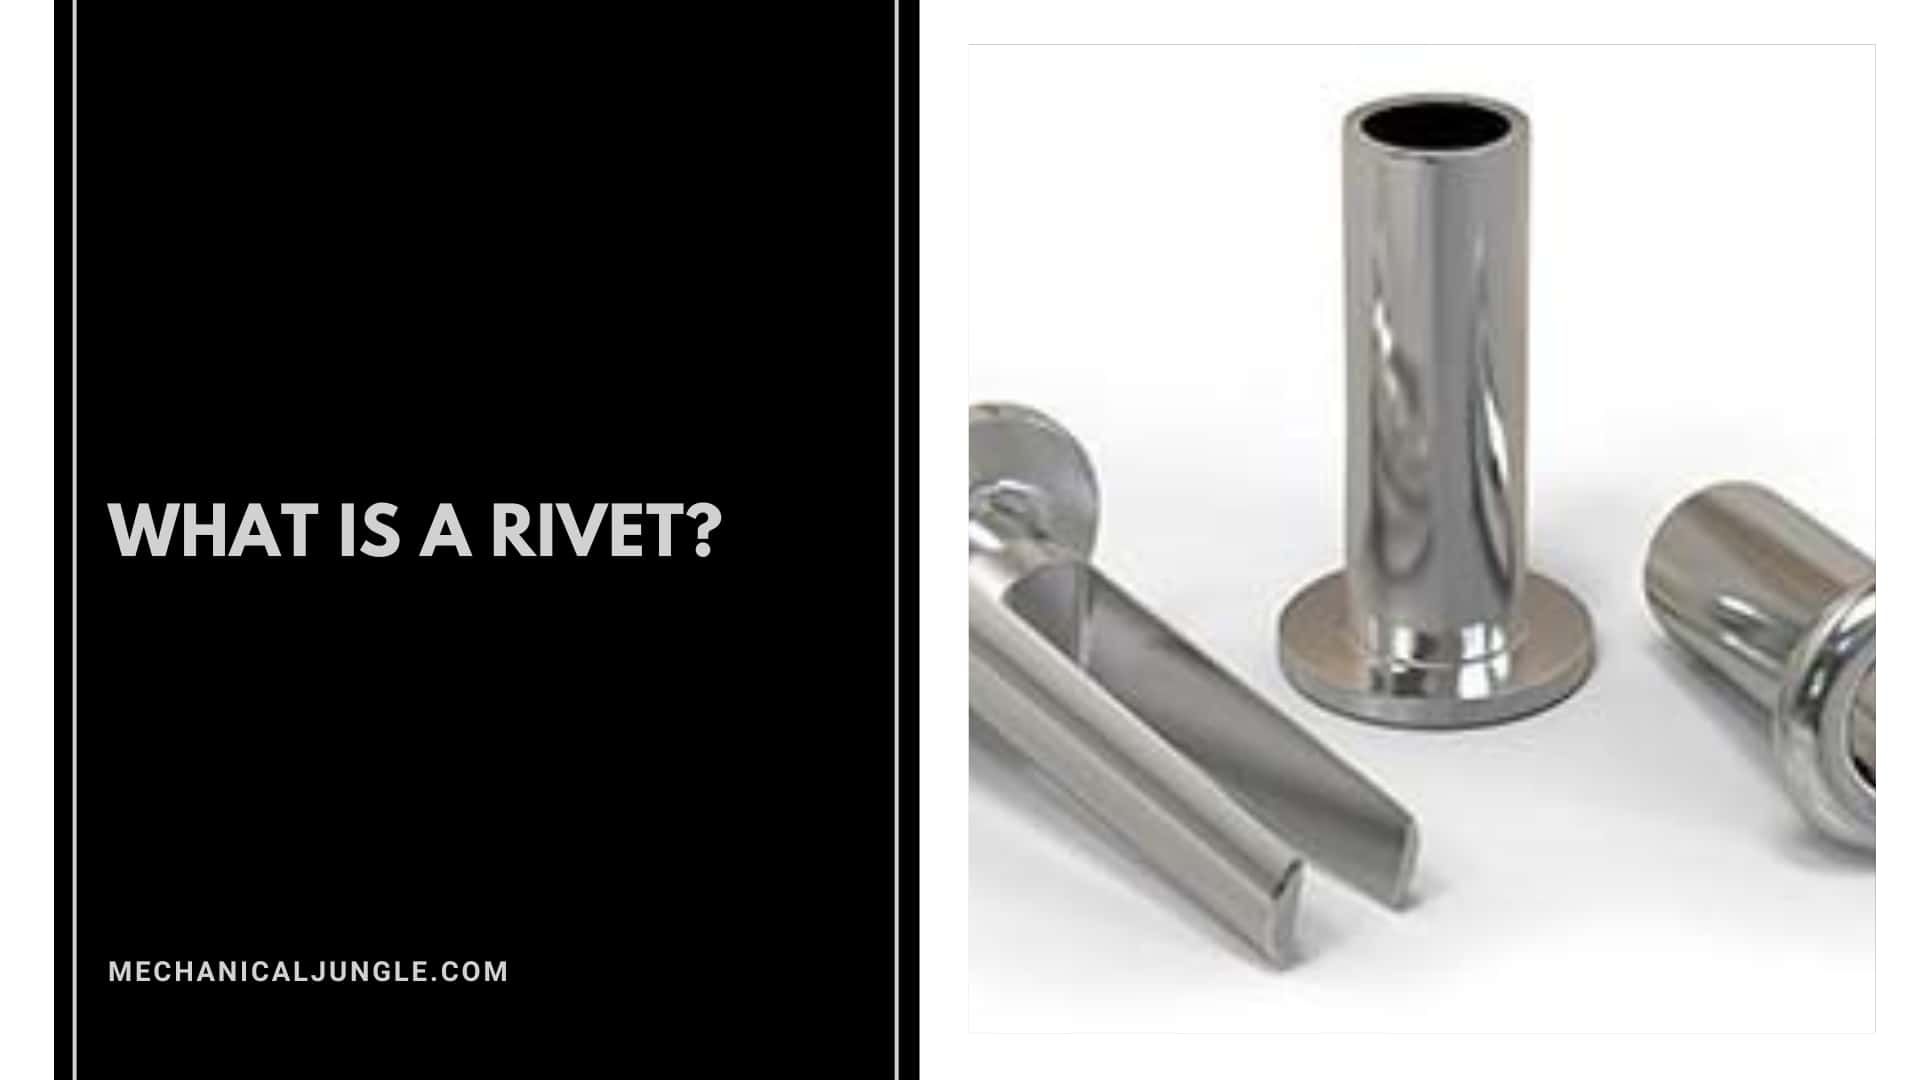 What Is a Rivet?